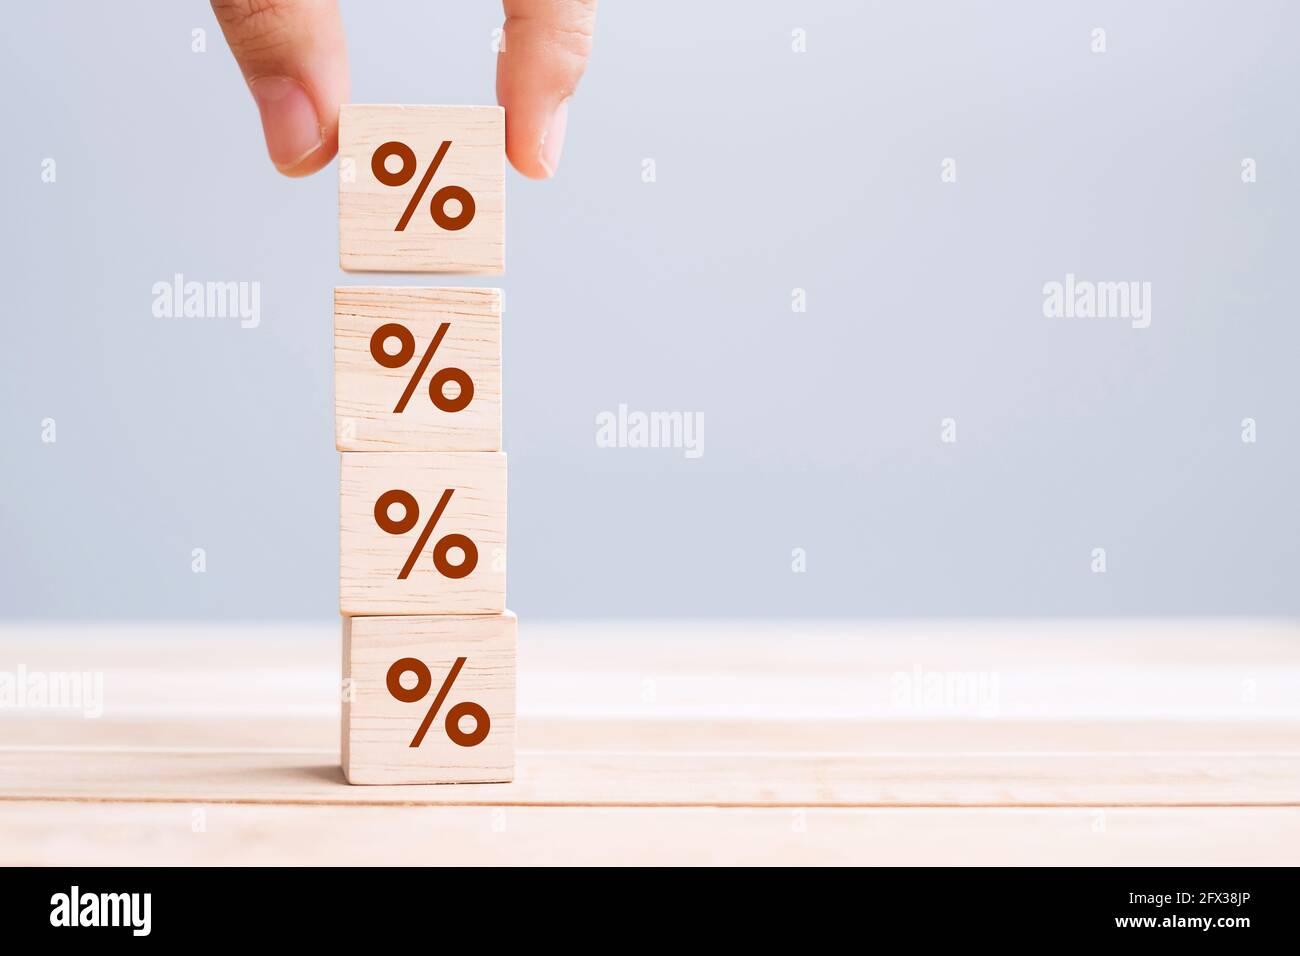 business man Hand putting wood cube block with percentage symbol icon. Interest rate,  financial, ranking and mortgage rates concept Stock Photo